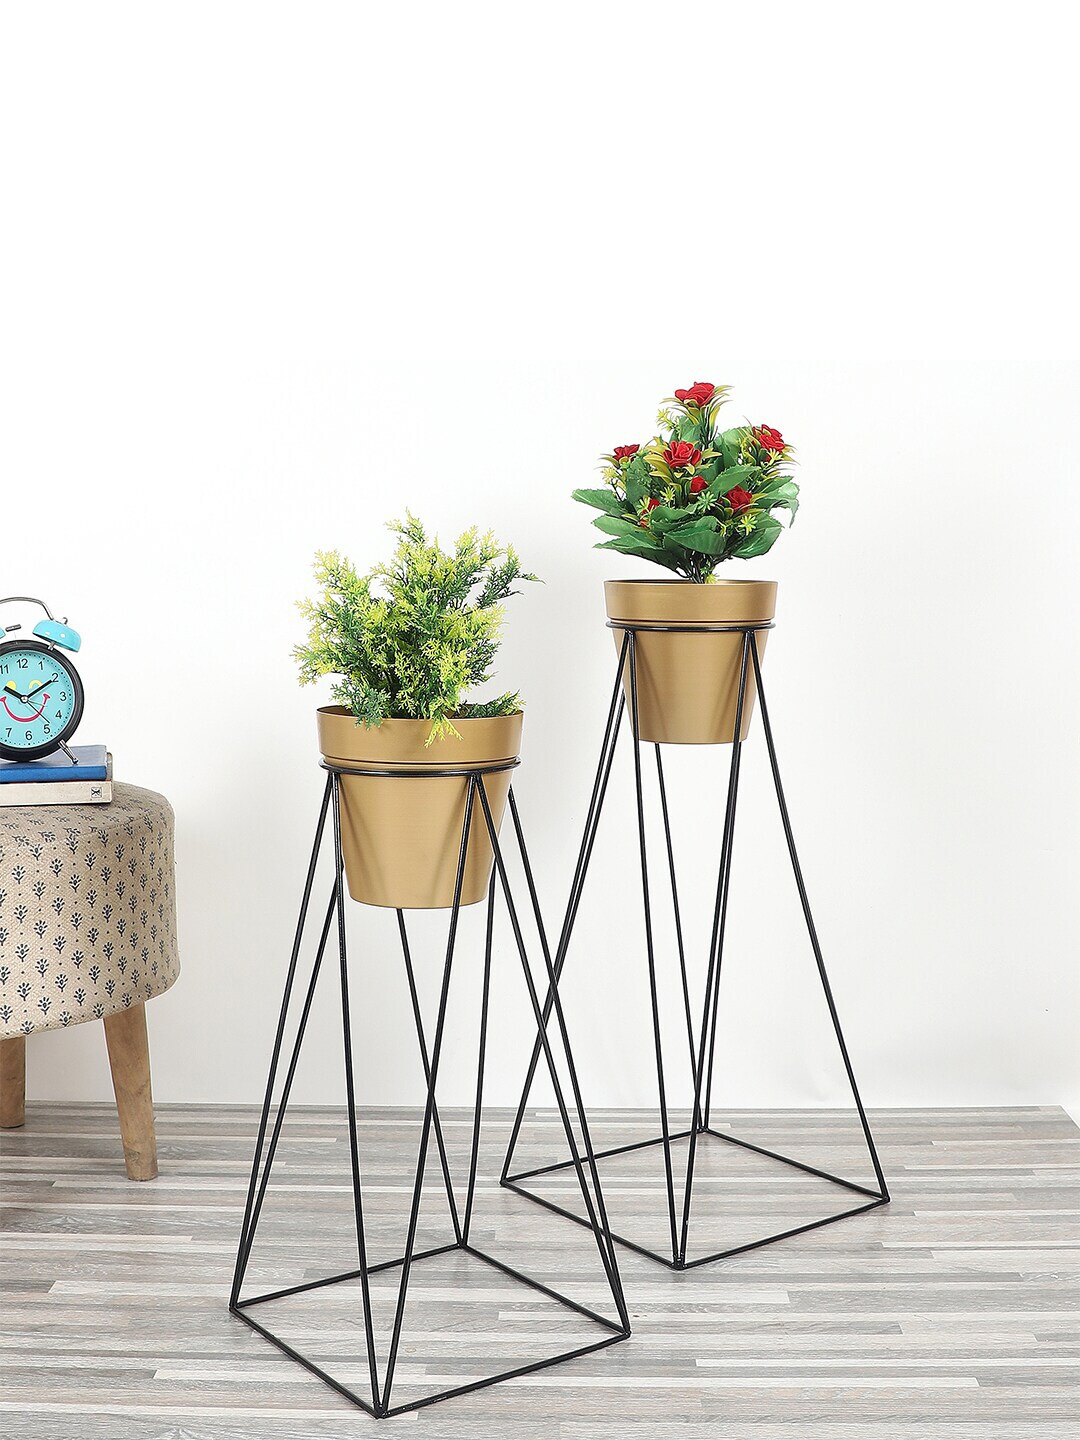 Amaya Decors Set Of 2 Gold-Toned & Black Solid Planters With Stand Price in India